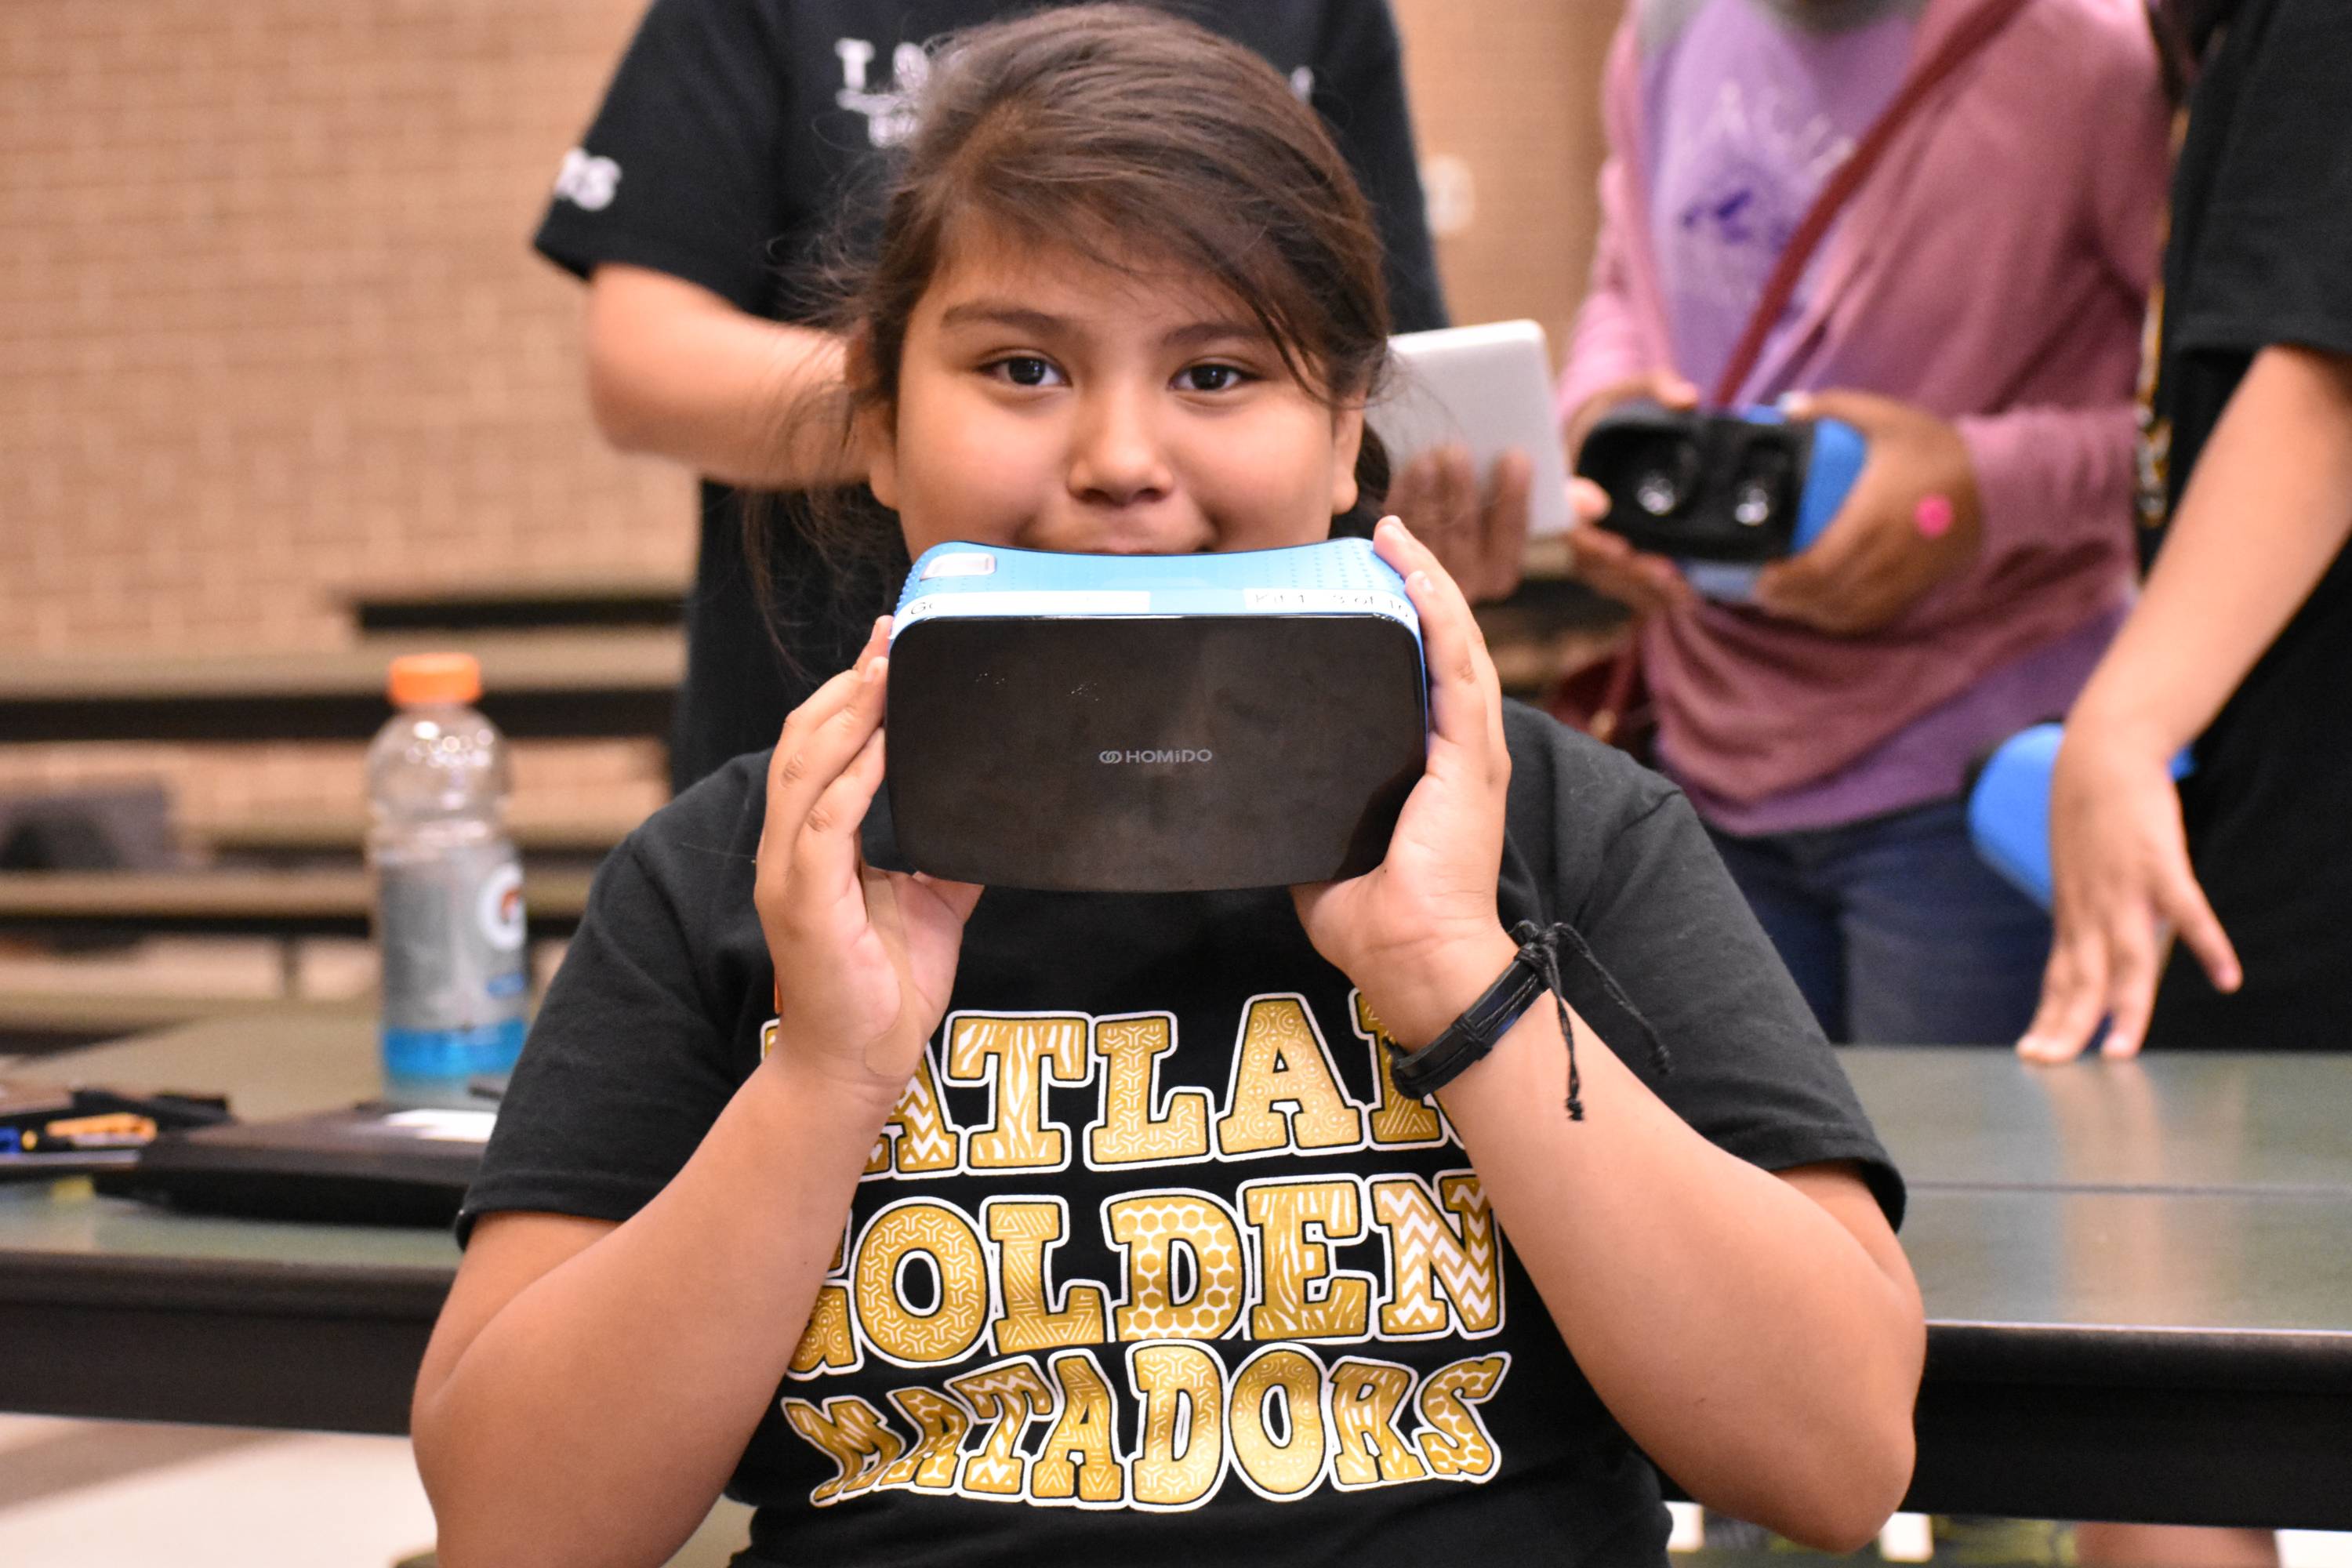 LBJ Institute brings hands-on STEM experiences to elementary and middle school students